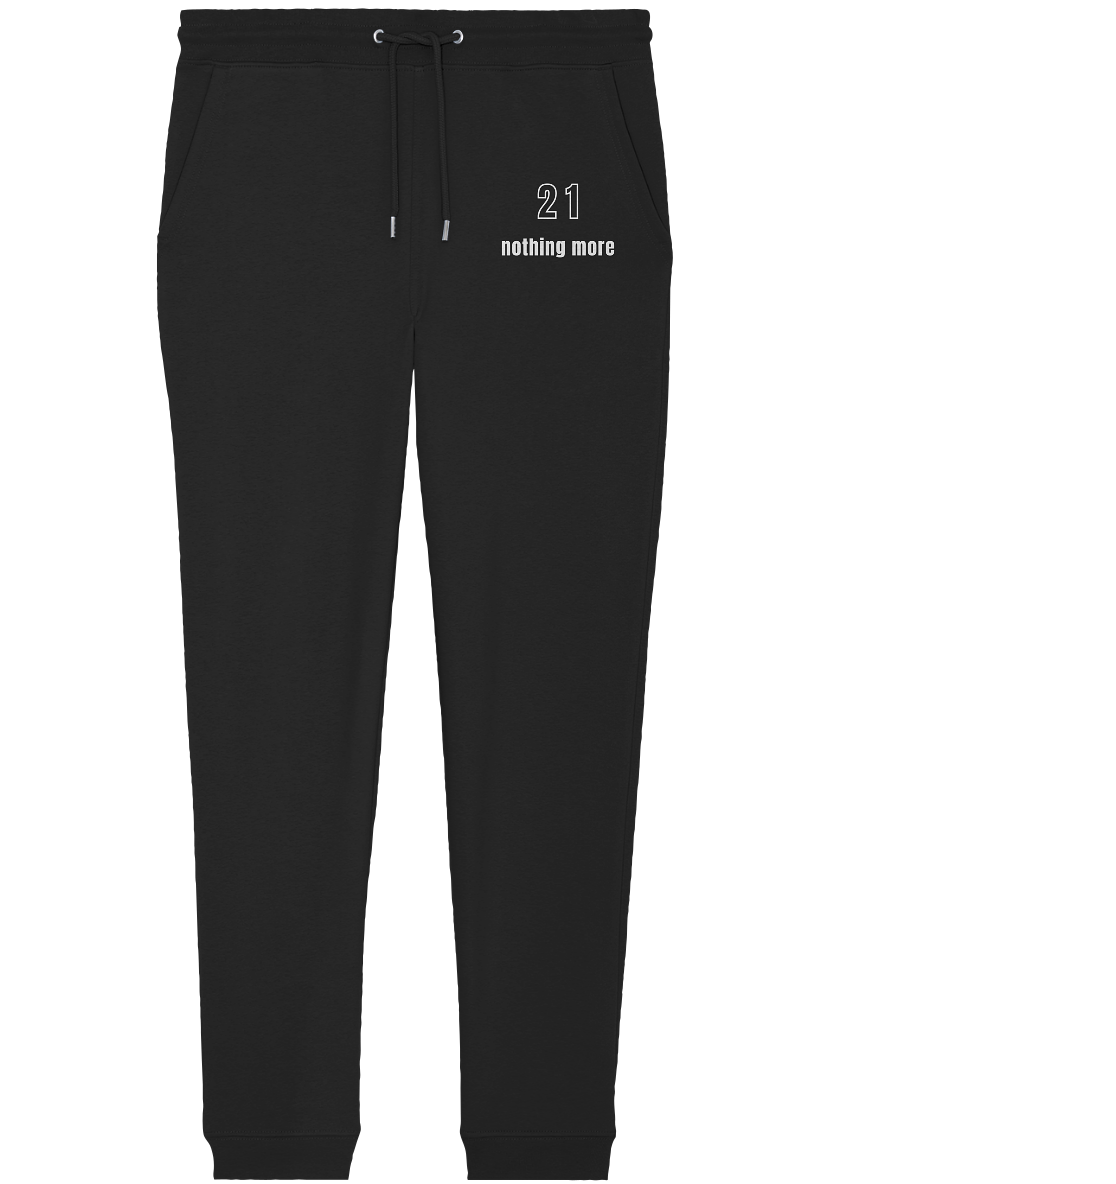 Minimalistisch - 21 nothing more - Organic Jogger Pants